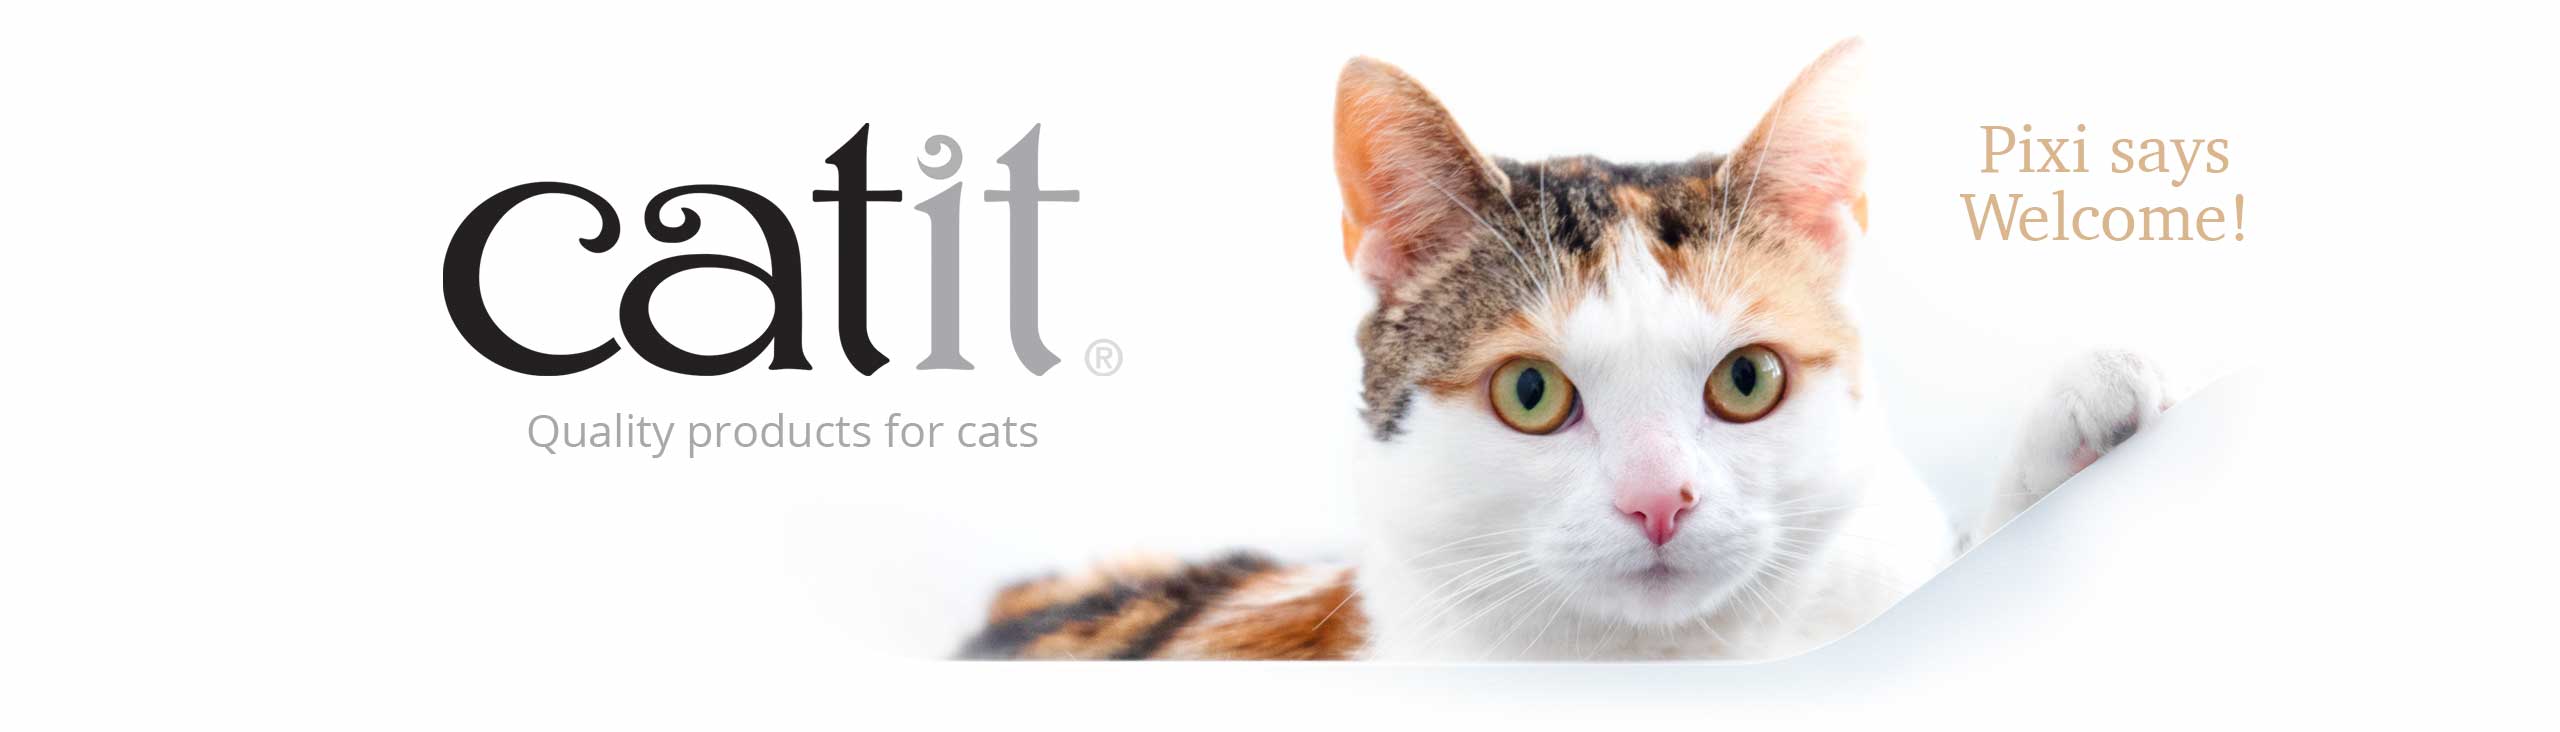 Quality Products For Cats Catit